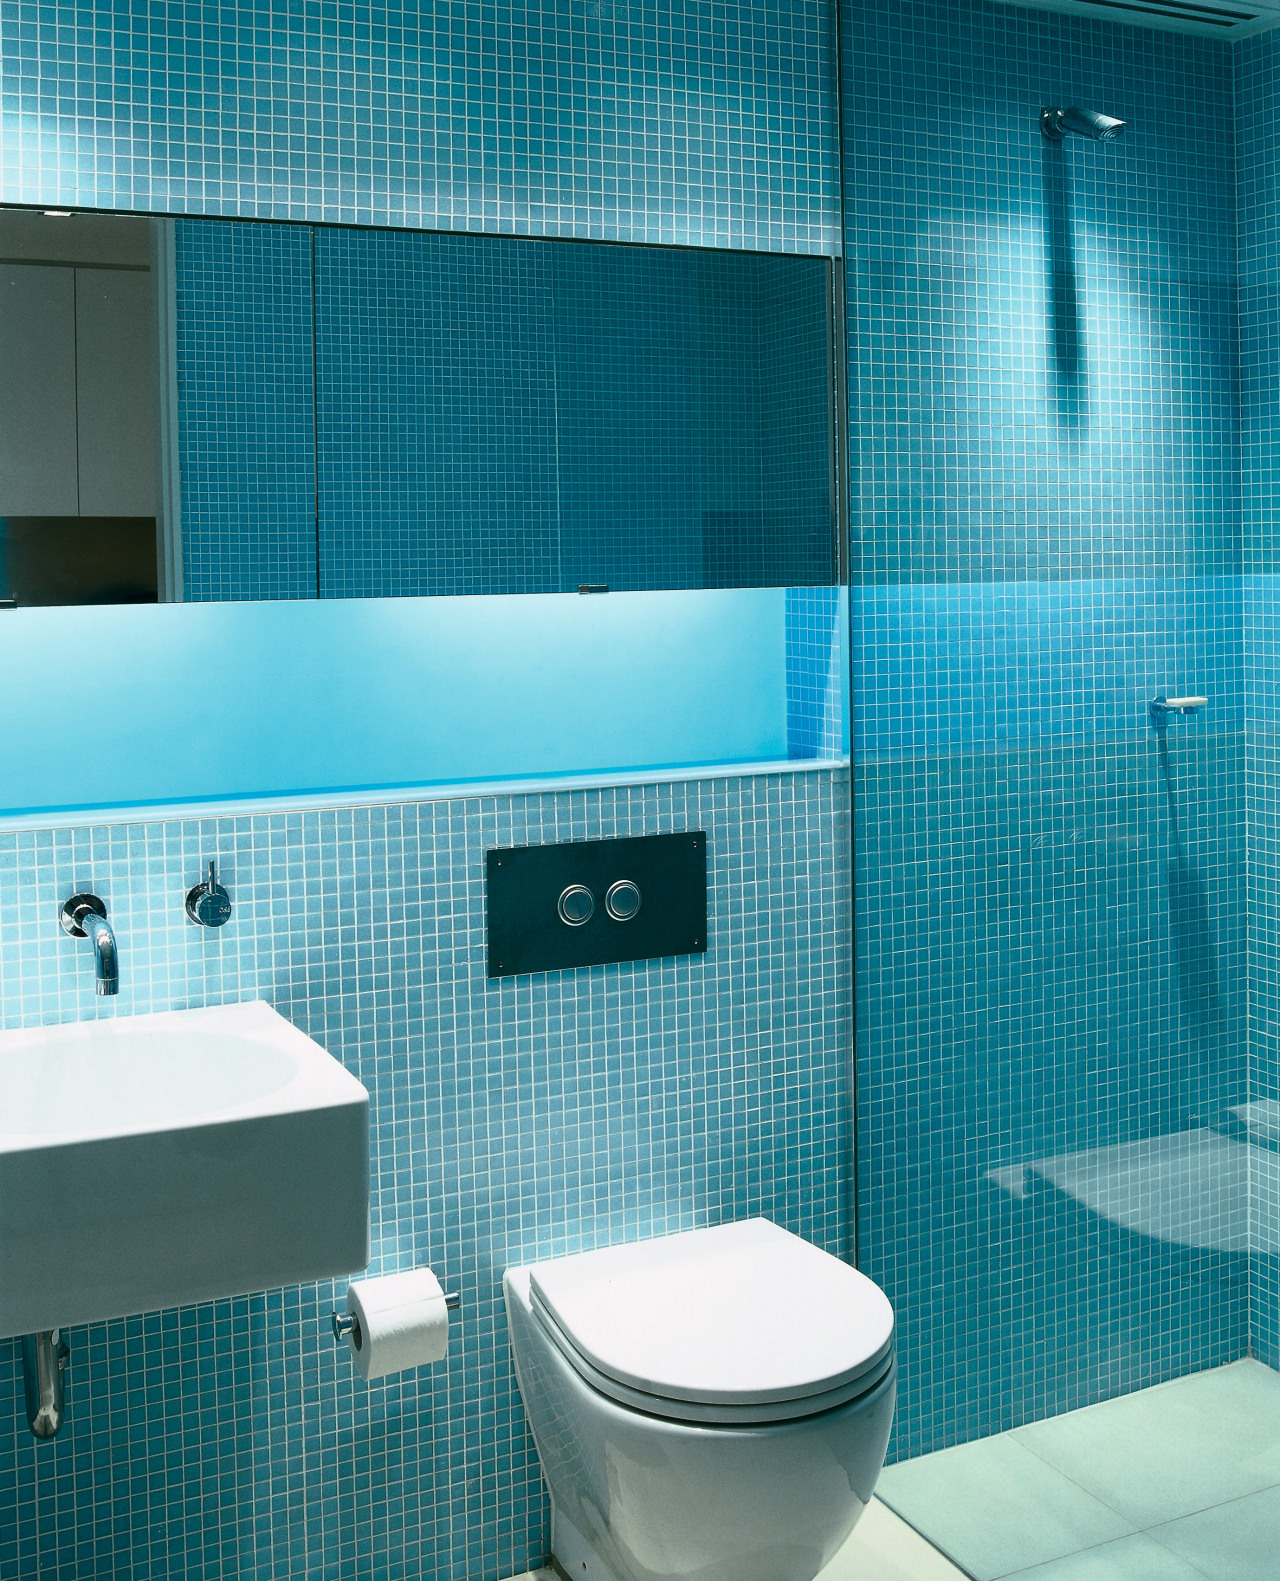 View of Toilet, Shower and faucetry in Bathroom. azure, bathroom, bidet, blue, ceiling, daylighting, floor, glass, interior design, plumbing fixture, product, product design, public toilet, purple, room, tile, toilet, toilet seat, turquoise, wall, teal